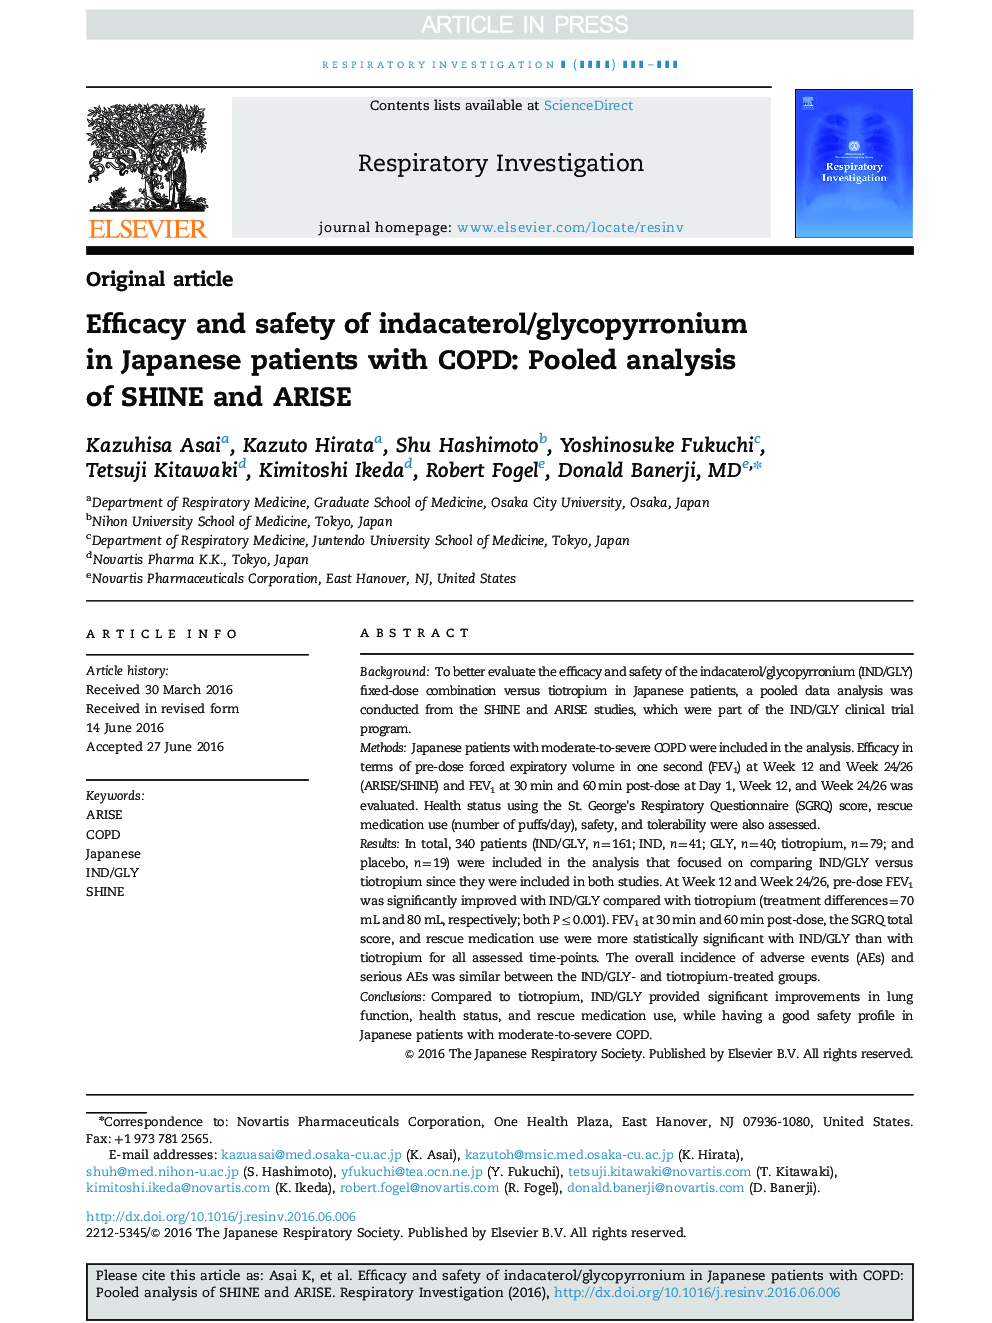 Efficacy and safety of indacaterol/glycopyrronium in Japanese patients with COPD: Pooled analysis of SHINE and ARISE